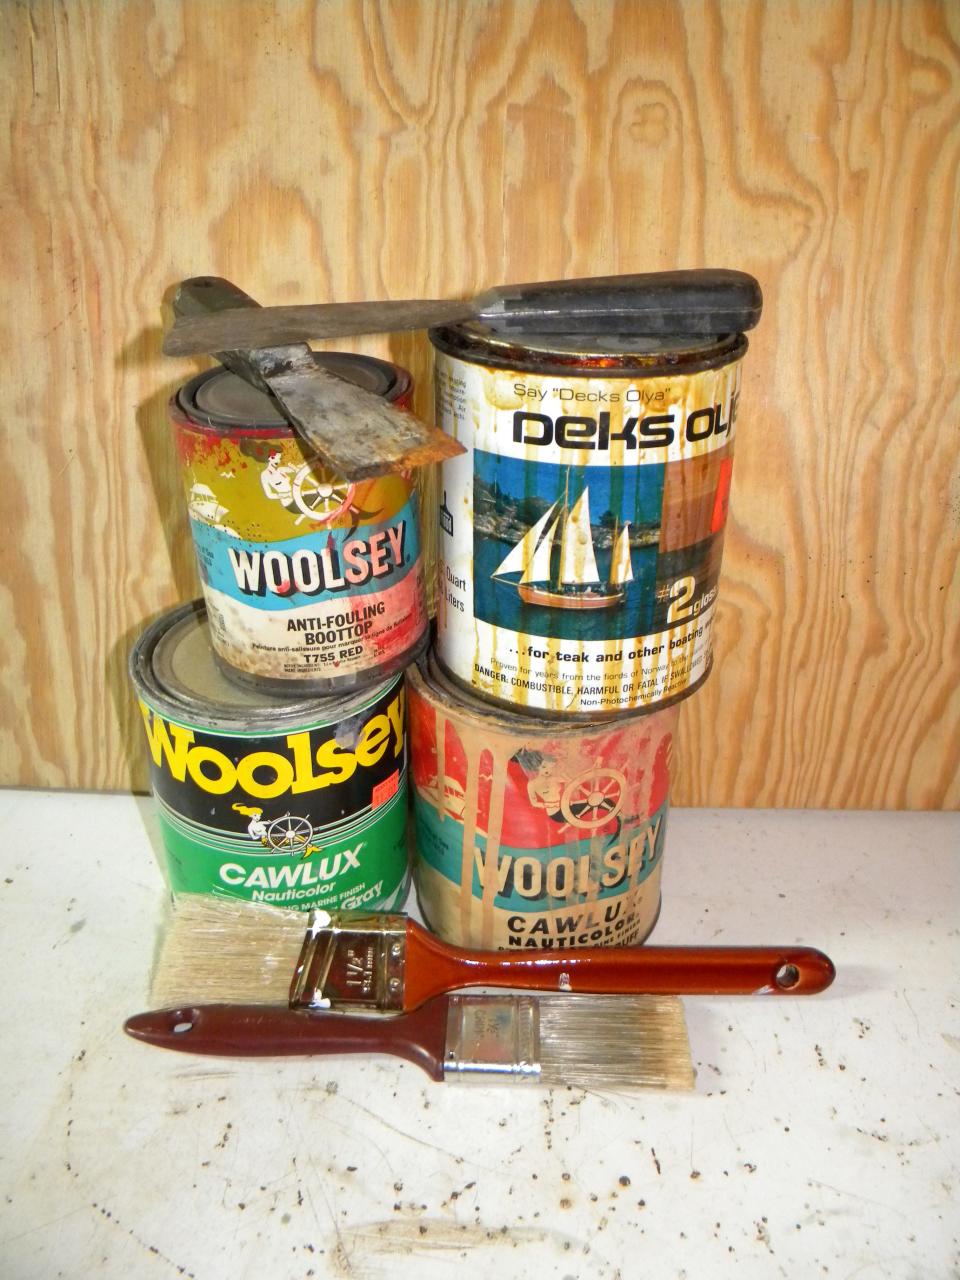 These are some of the tools of a do-it-yourself boatman. Woolsey paint was the marine standard of its day.